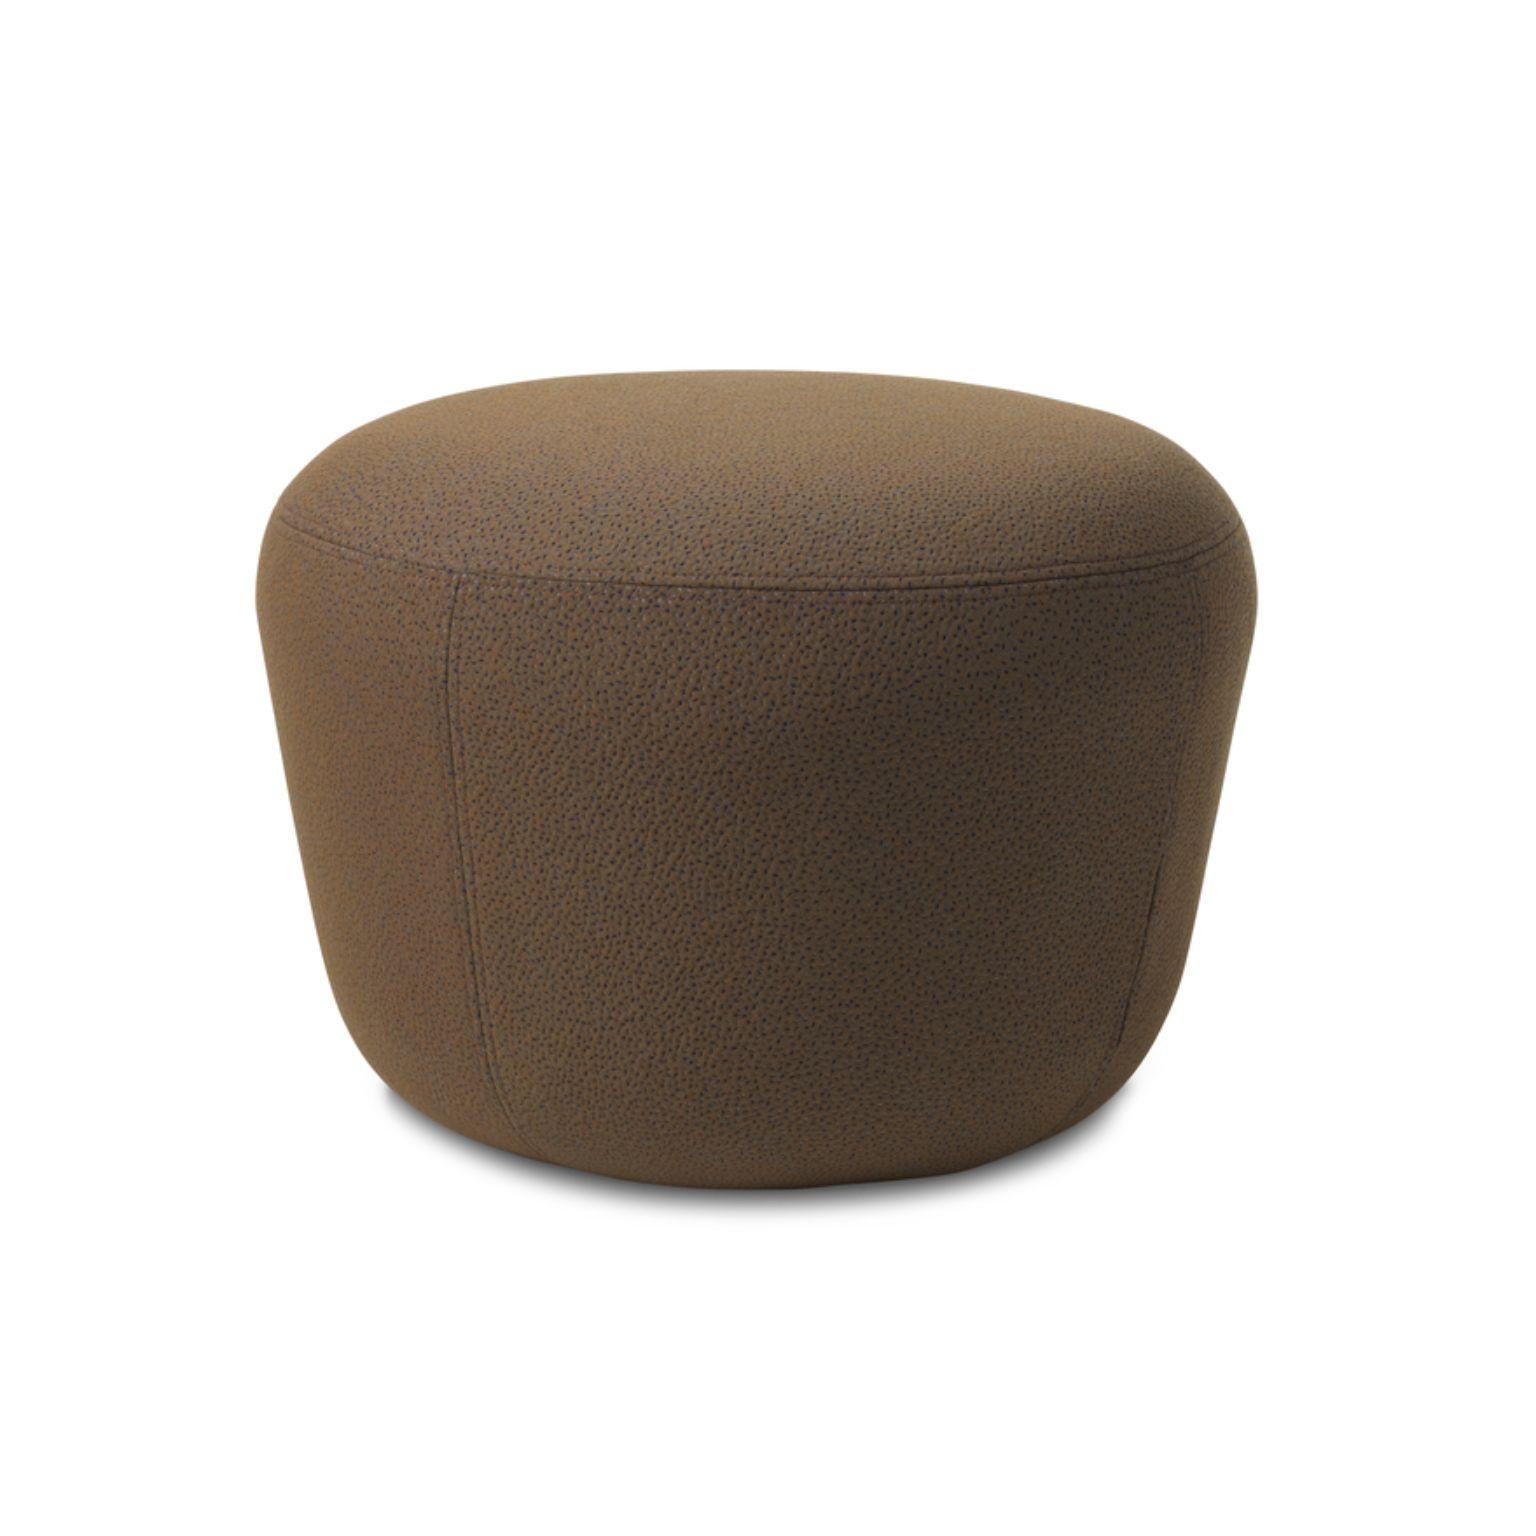 Danish Haven Sprinkles Eggplant Pouf by Warm Nordic For Sale